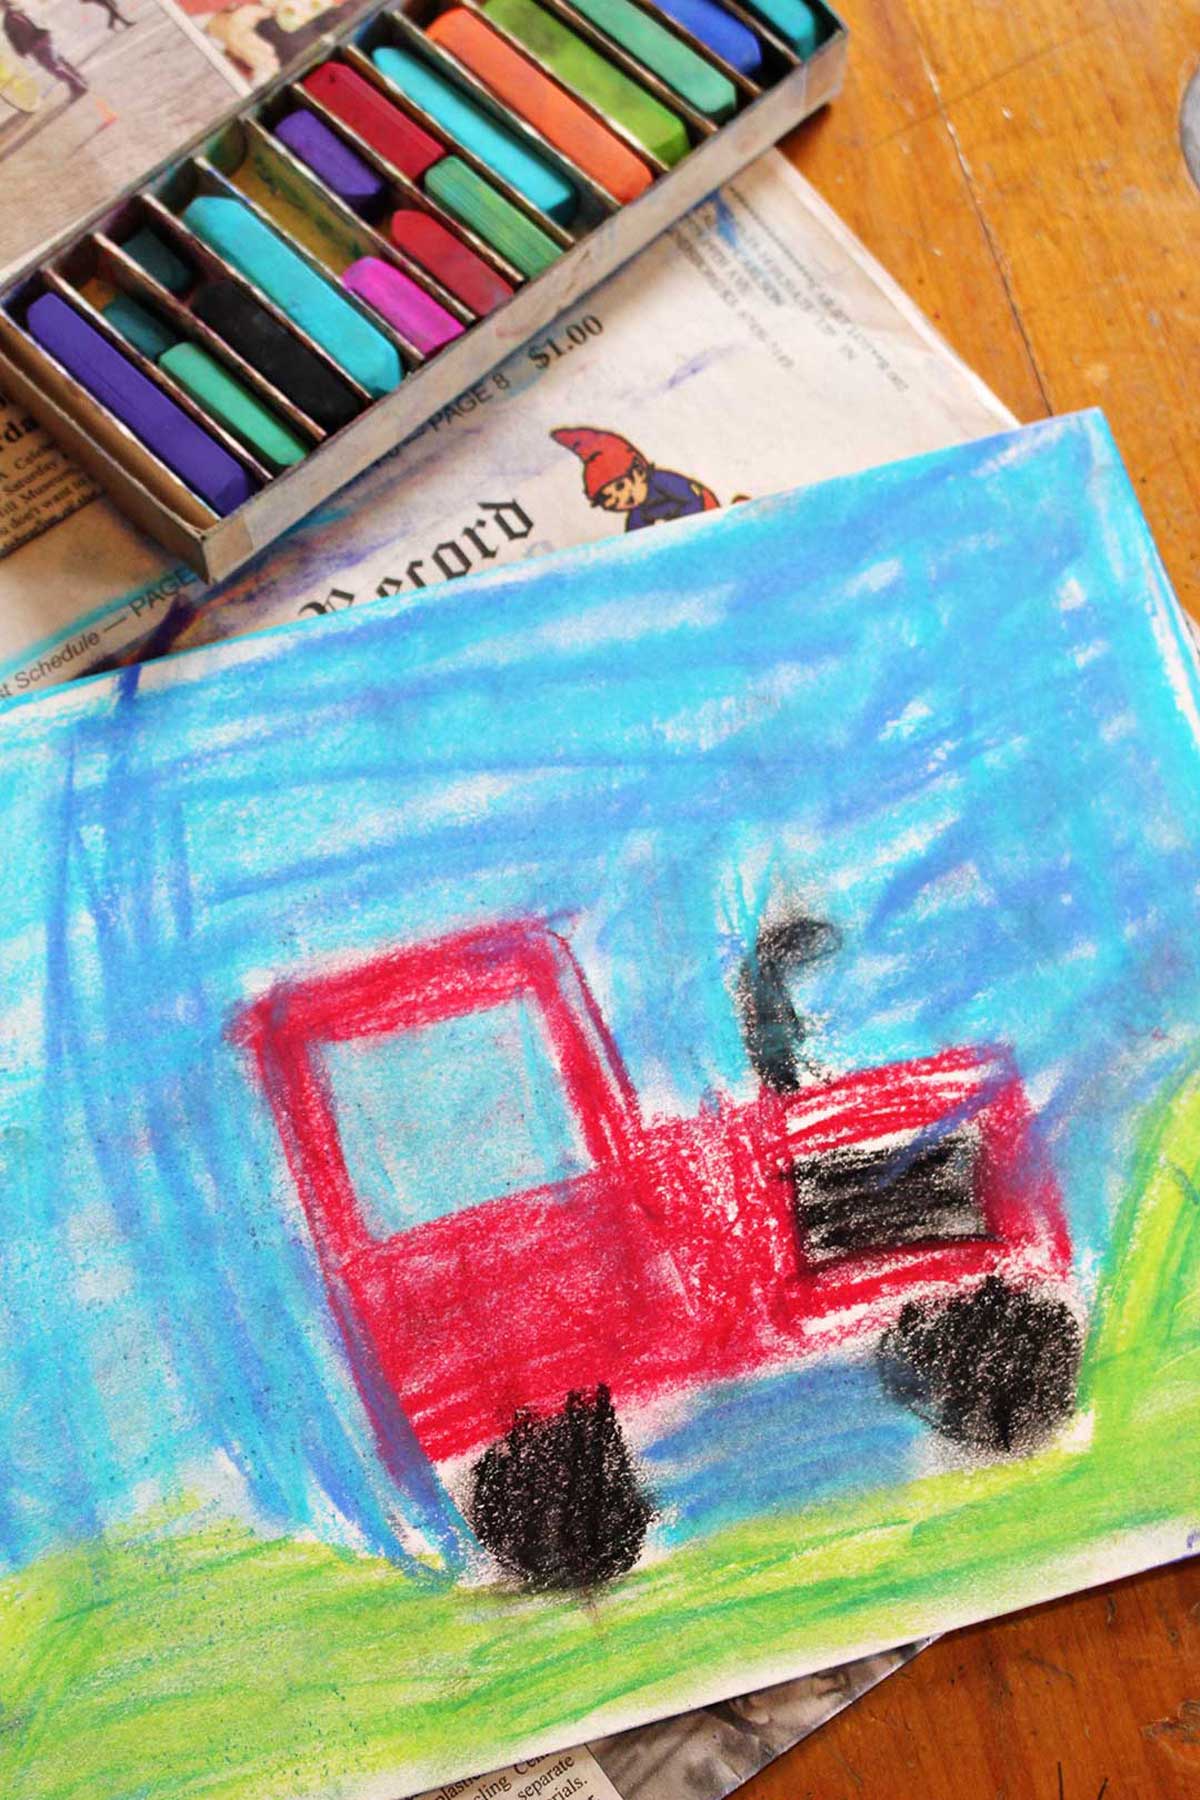 Drawing of a red tractor with pastels on a kitchen table.